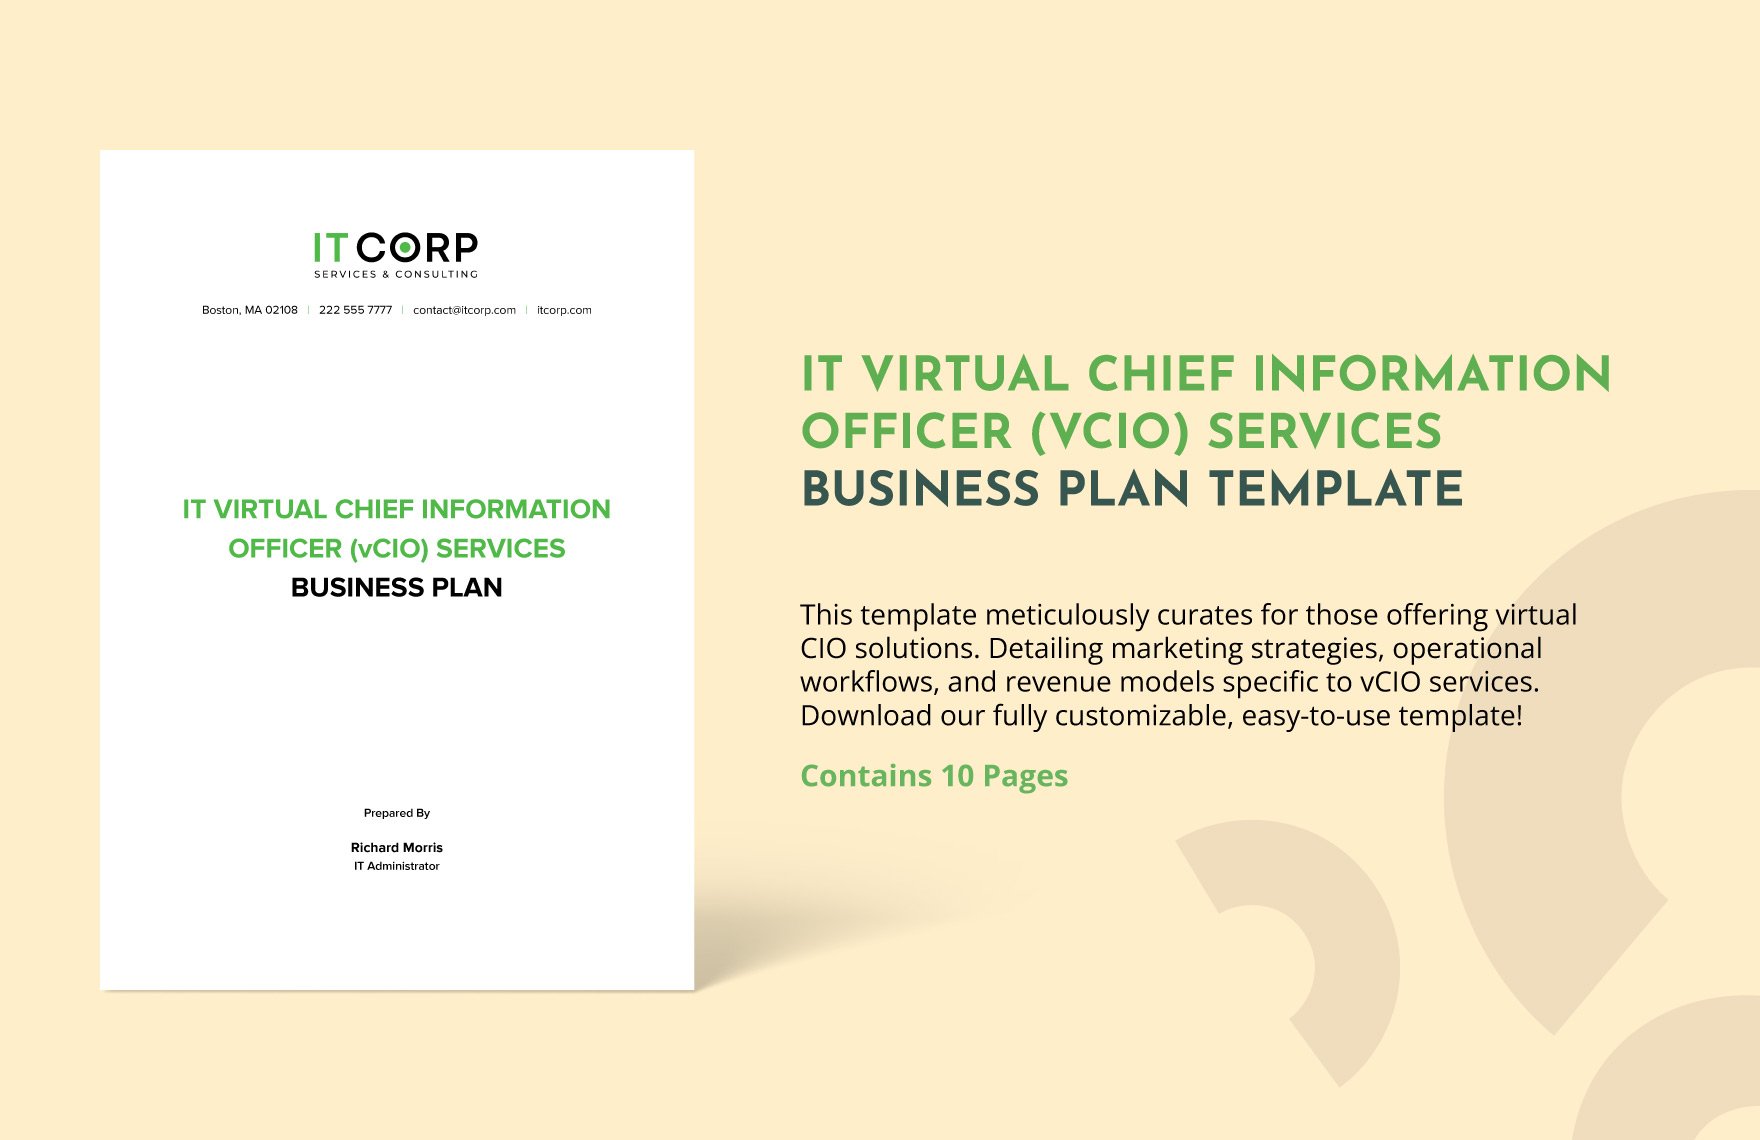 IT Virtual Chief Information Officer (vCIO) Services Business Plan Template